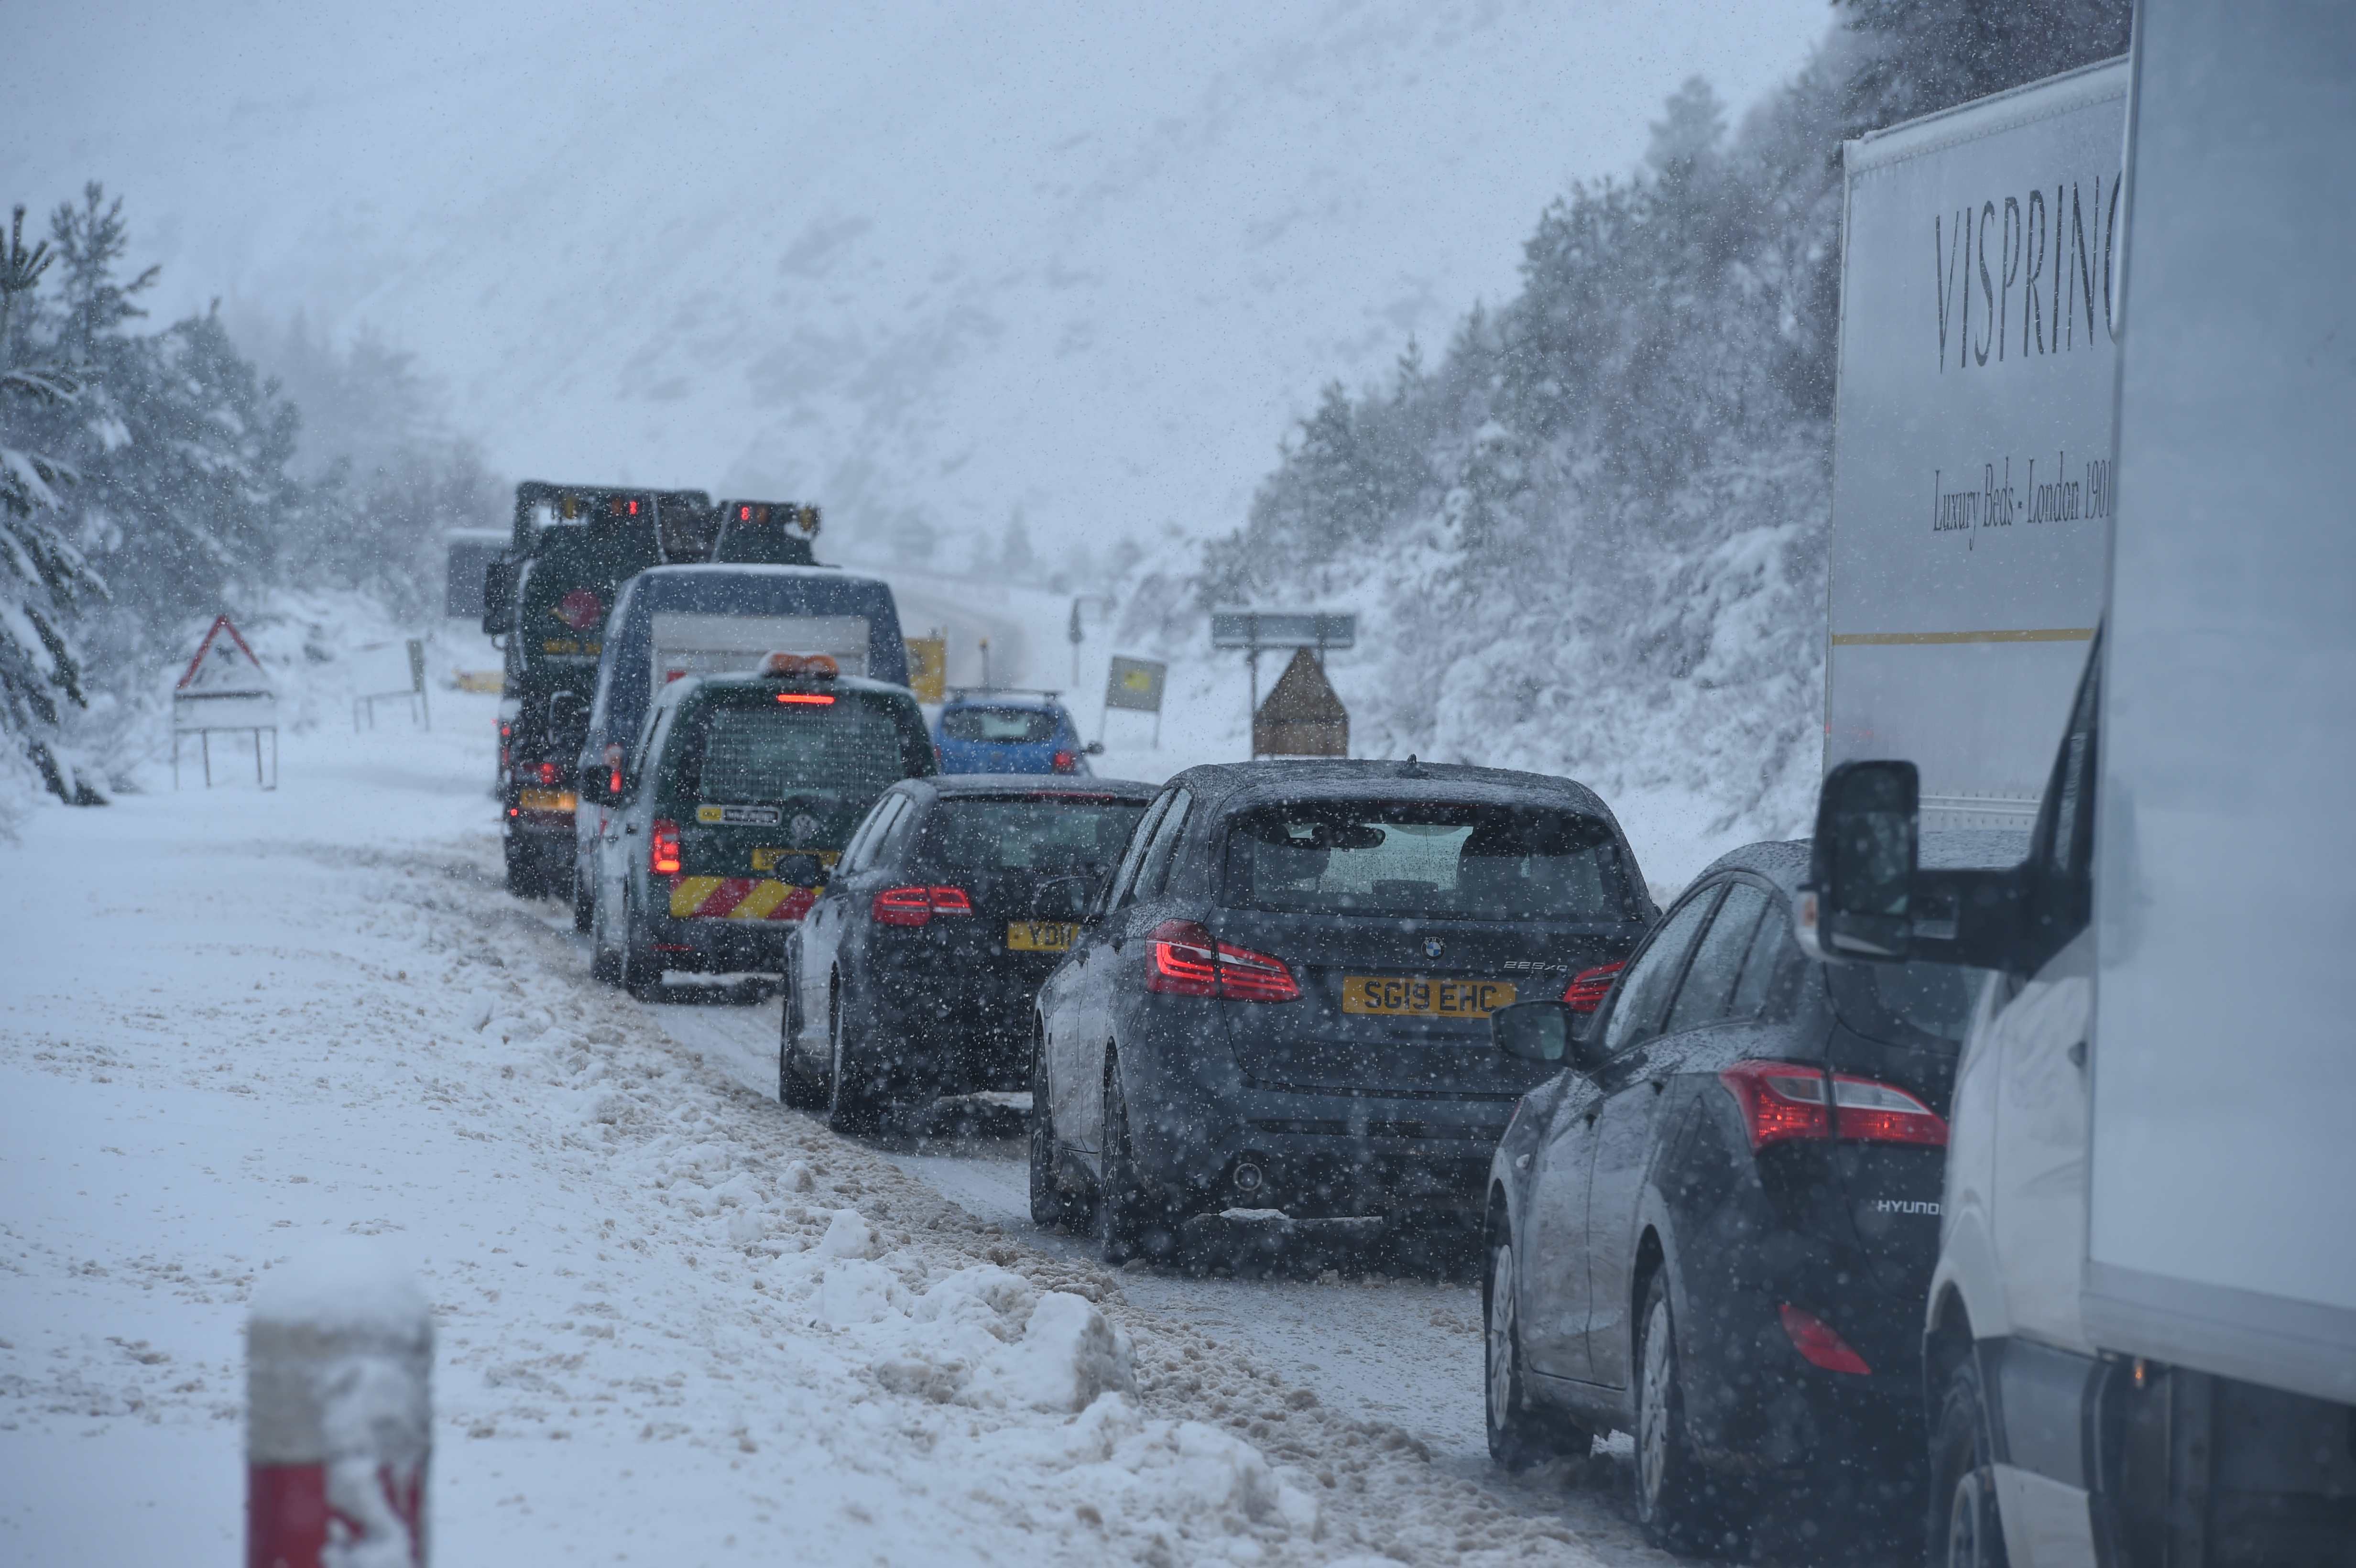 Snowy conditions on the A9. Pics by Sandy McCook.